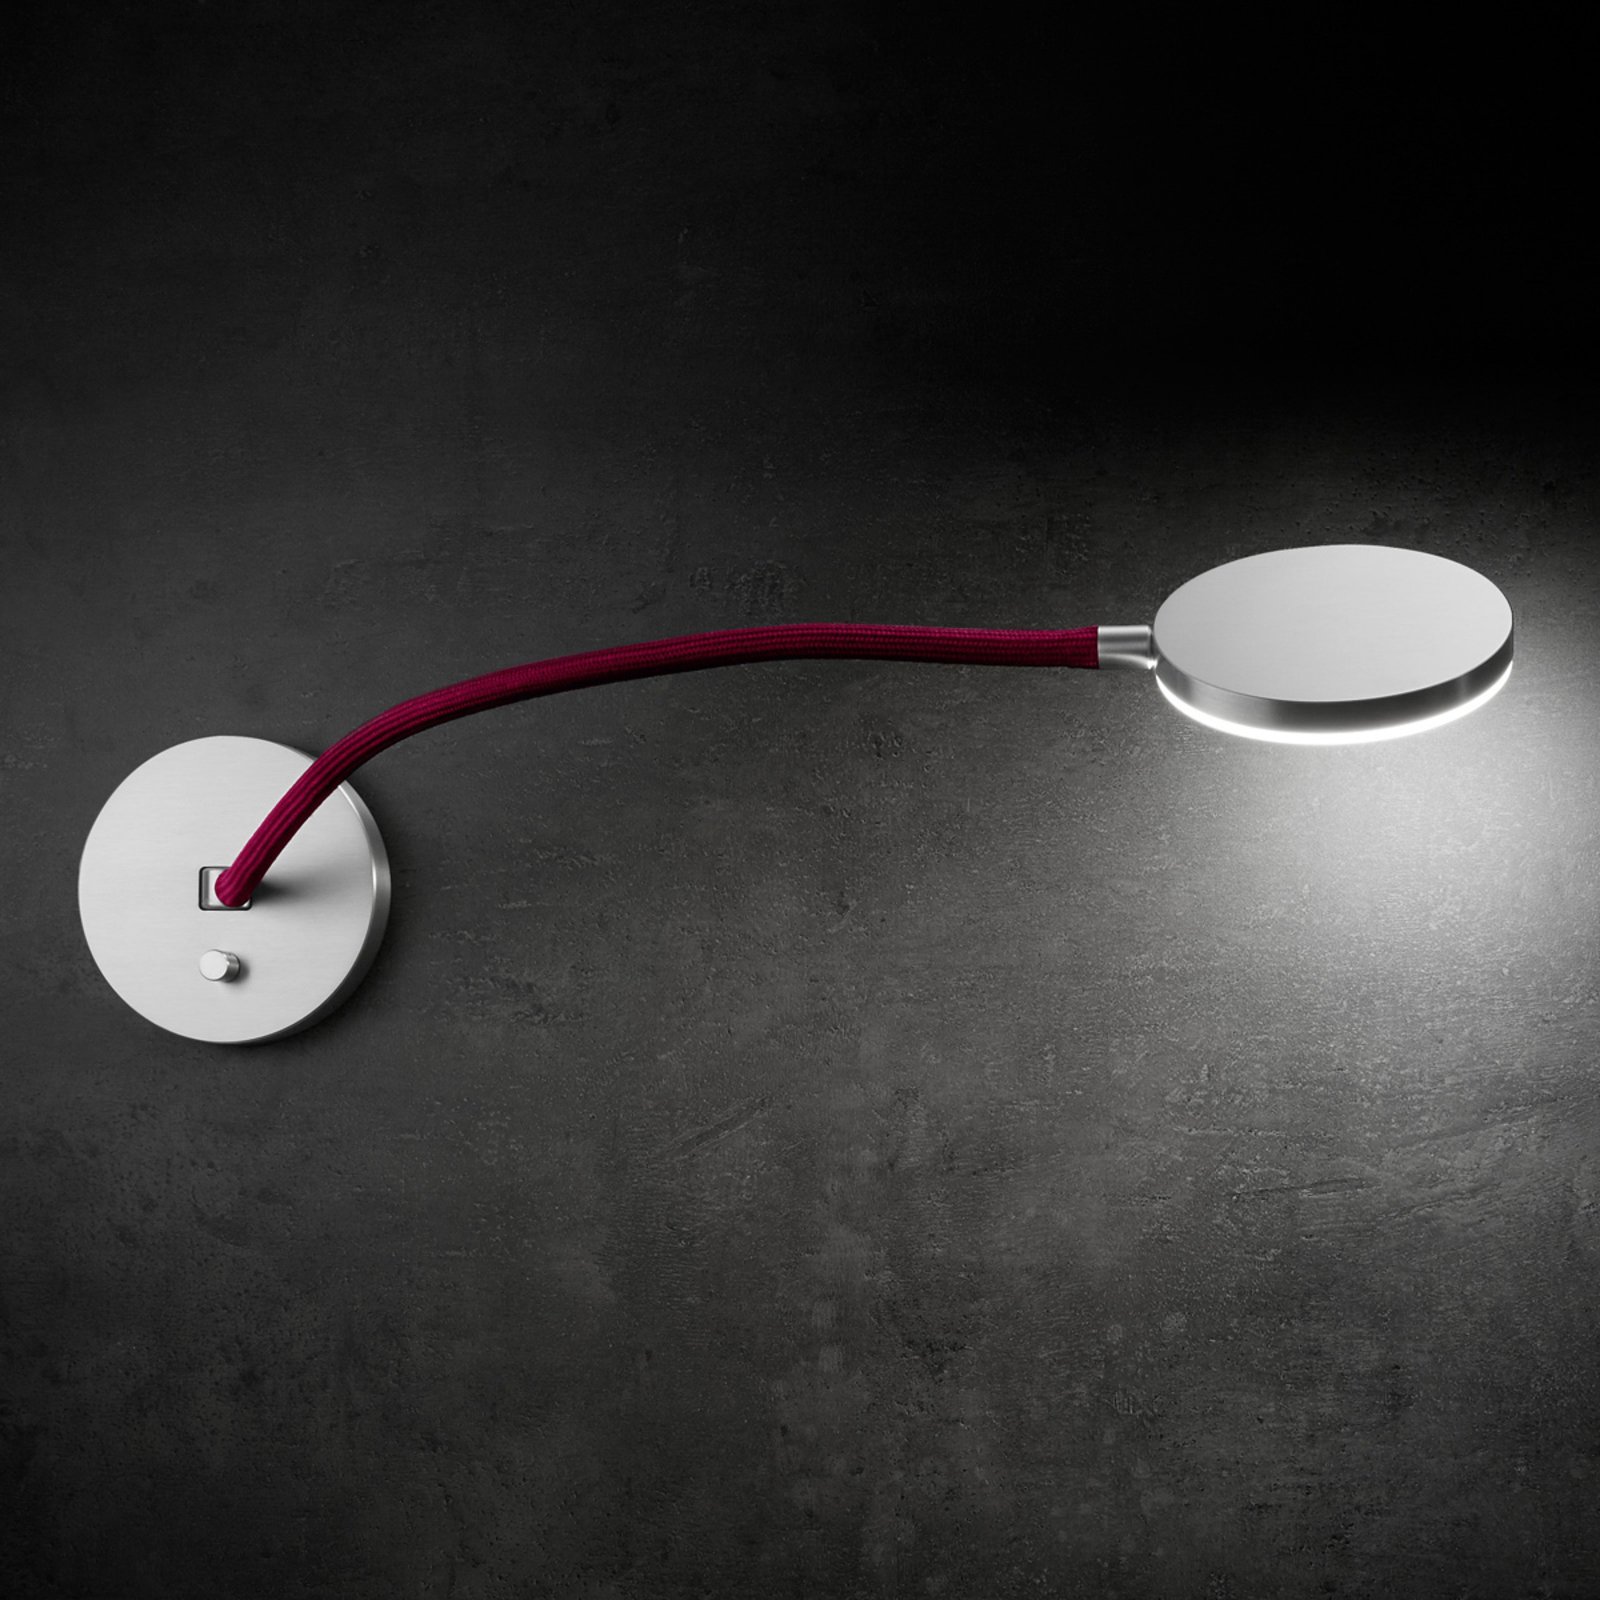 With red flexible arm – Flex W LED wall light